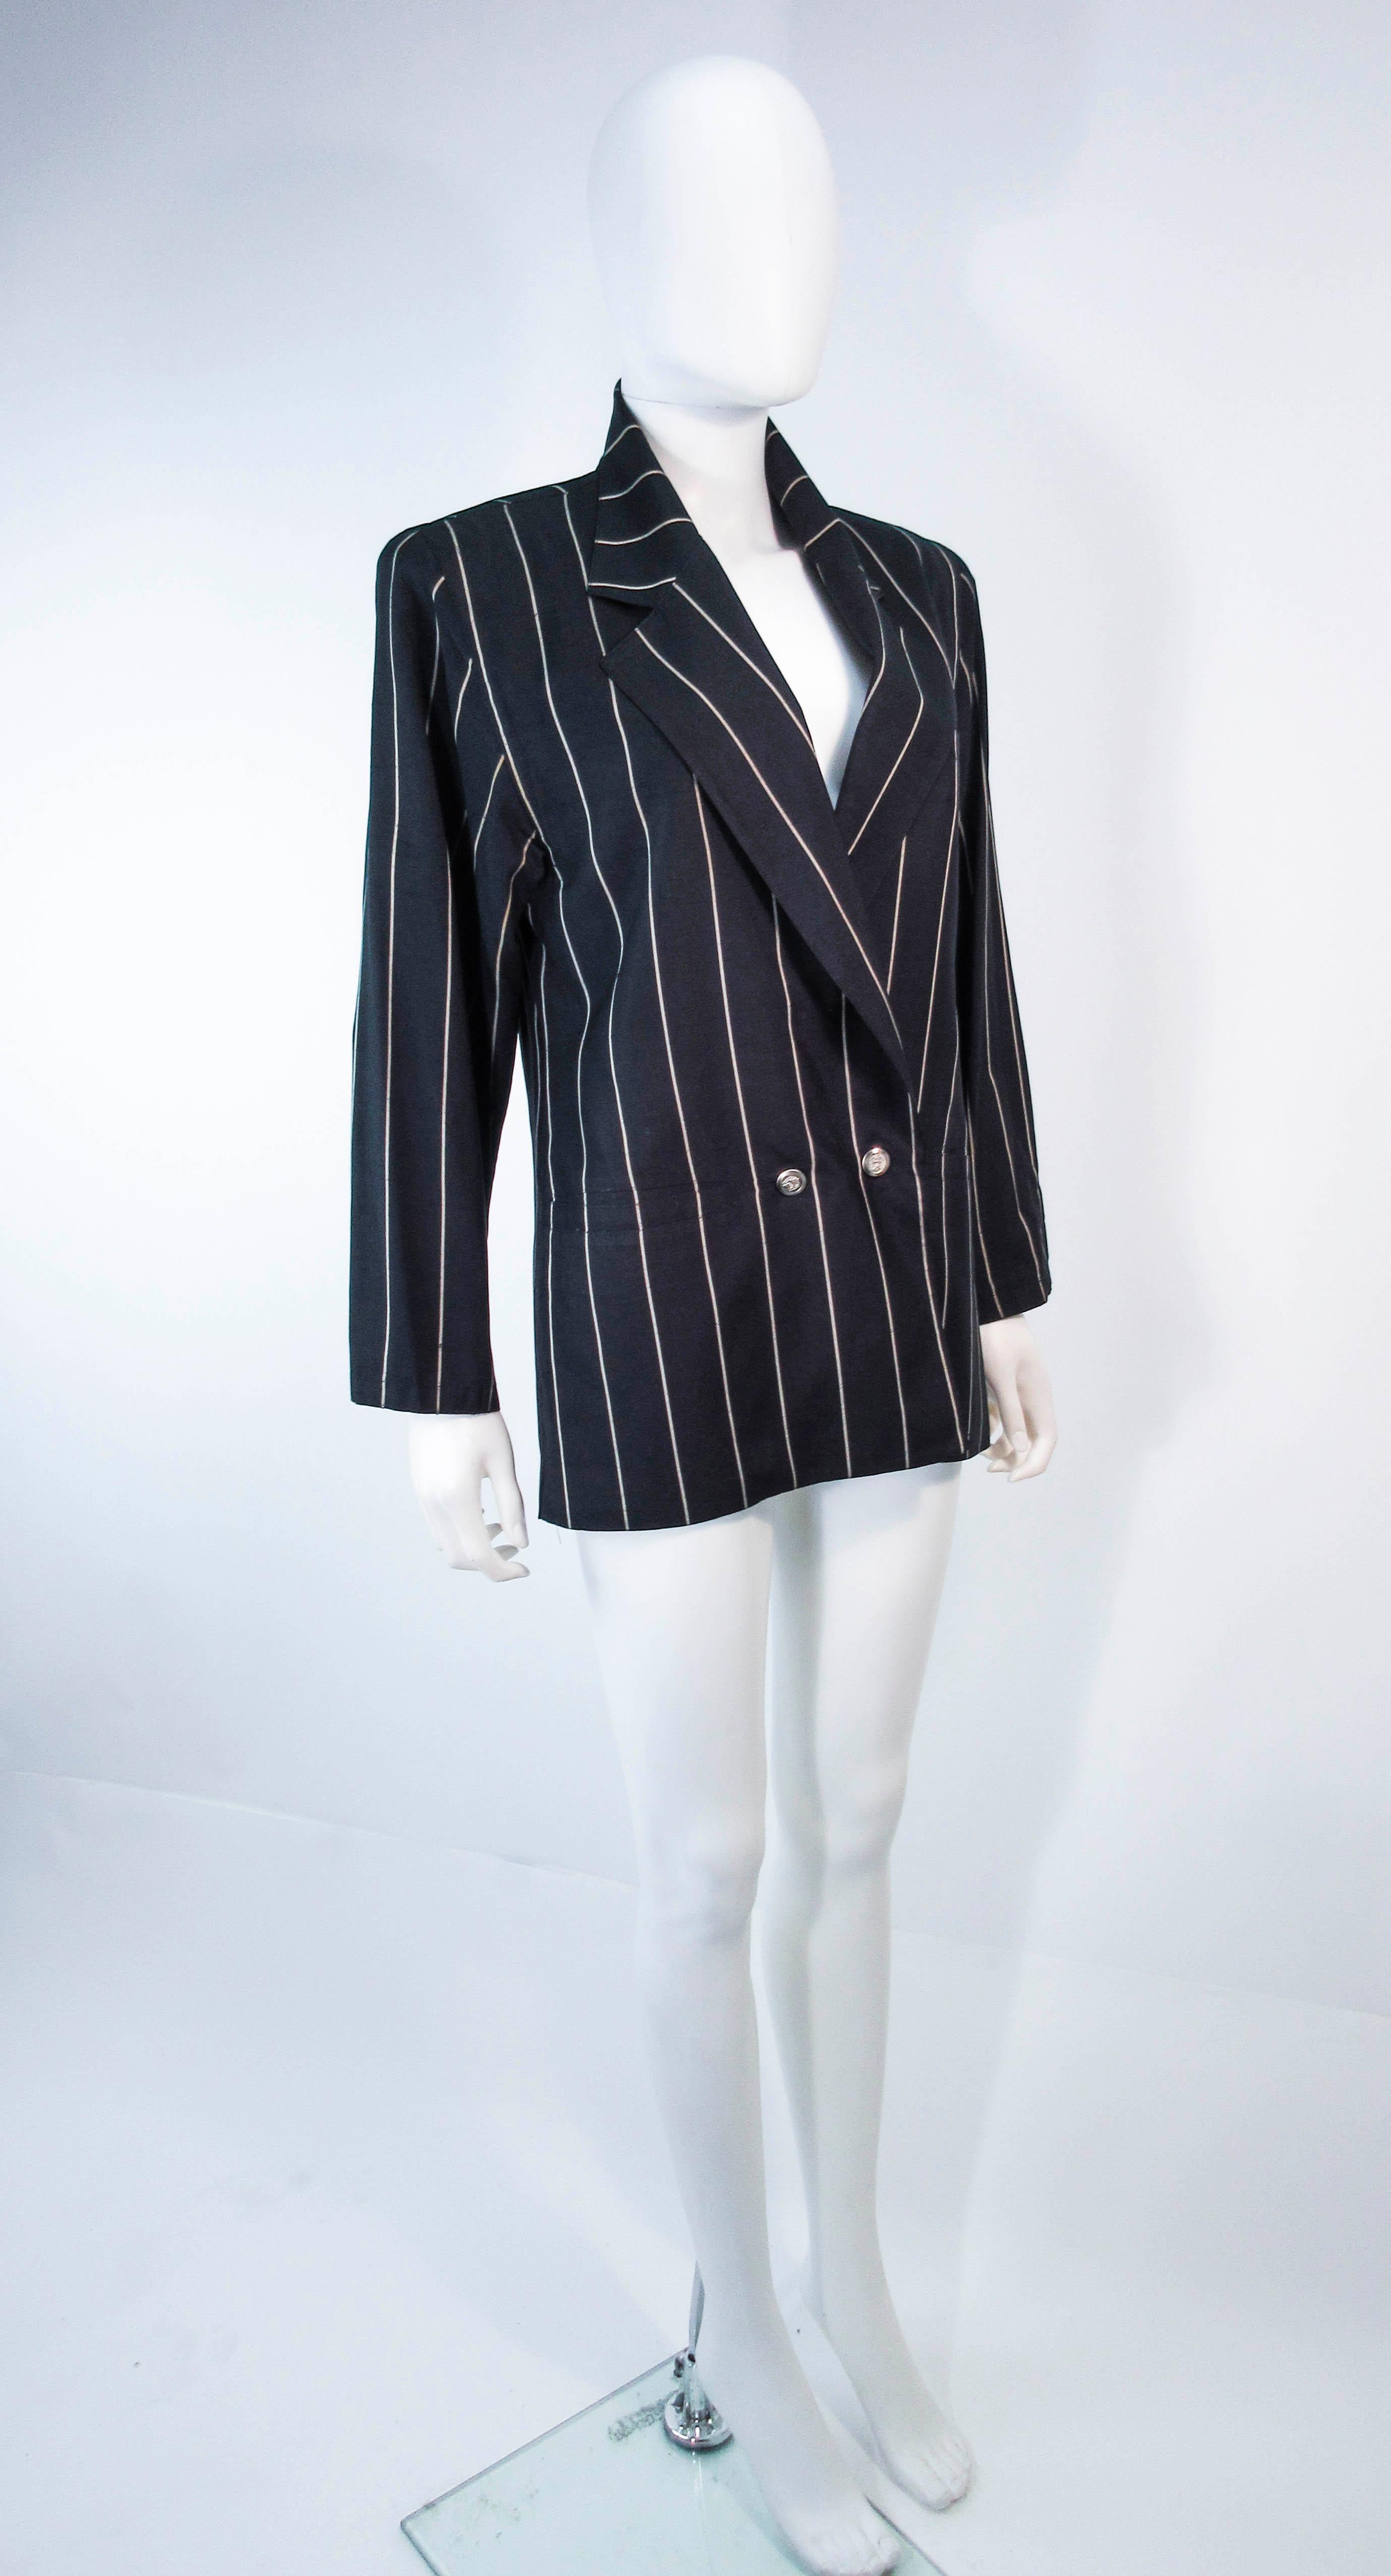 GIANNI VERSACE Black & Cream Striped Jacket Size 6 For Sale 4